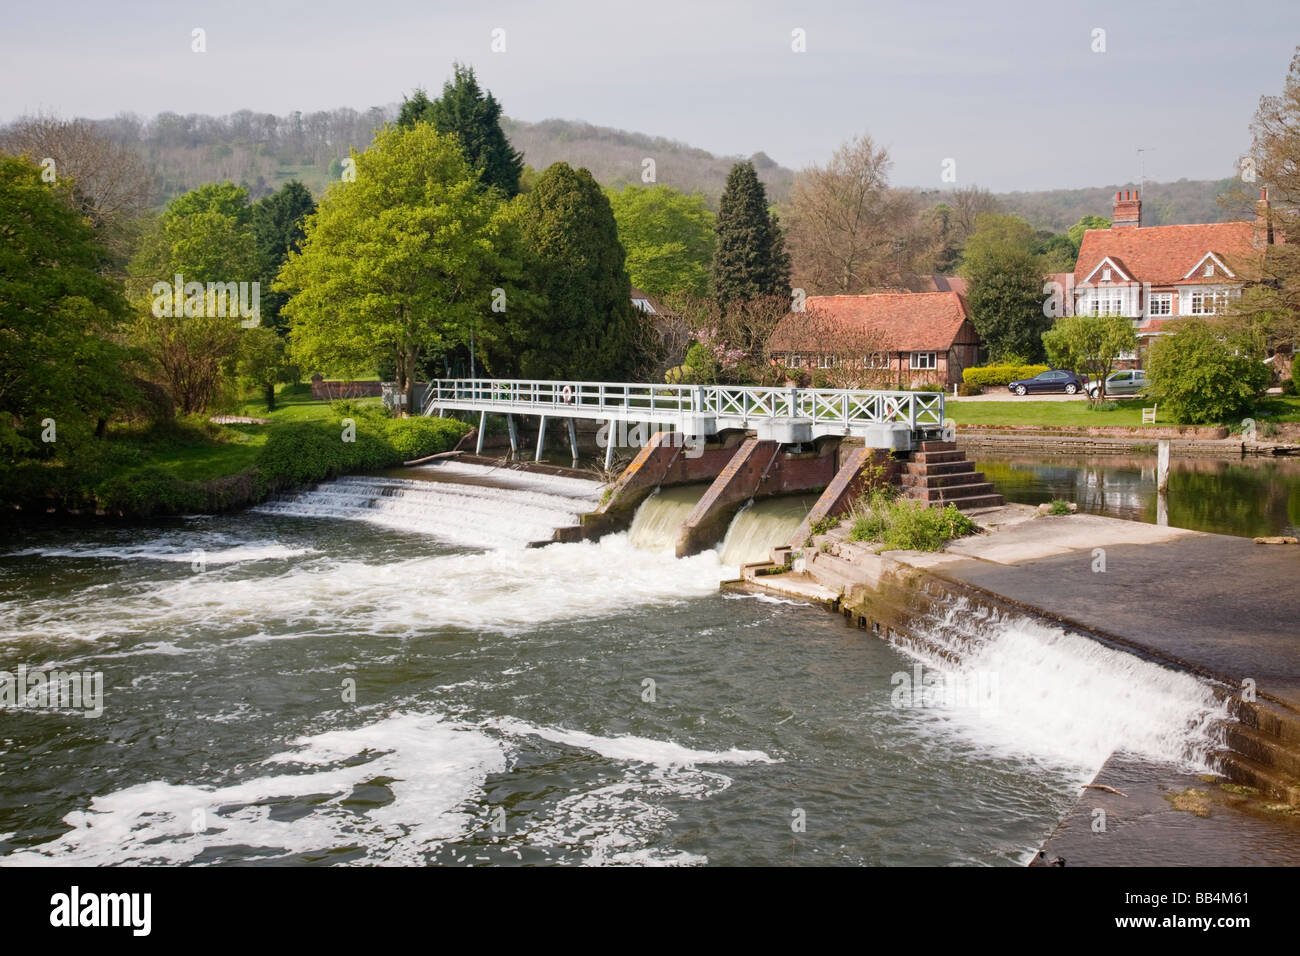 Weir on the River Thames at Goring Oxfordshire Uk Stock Photo